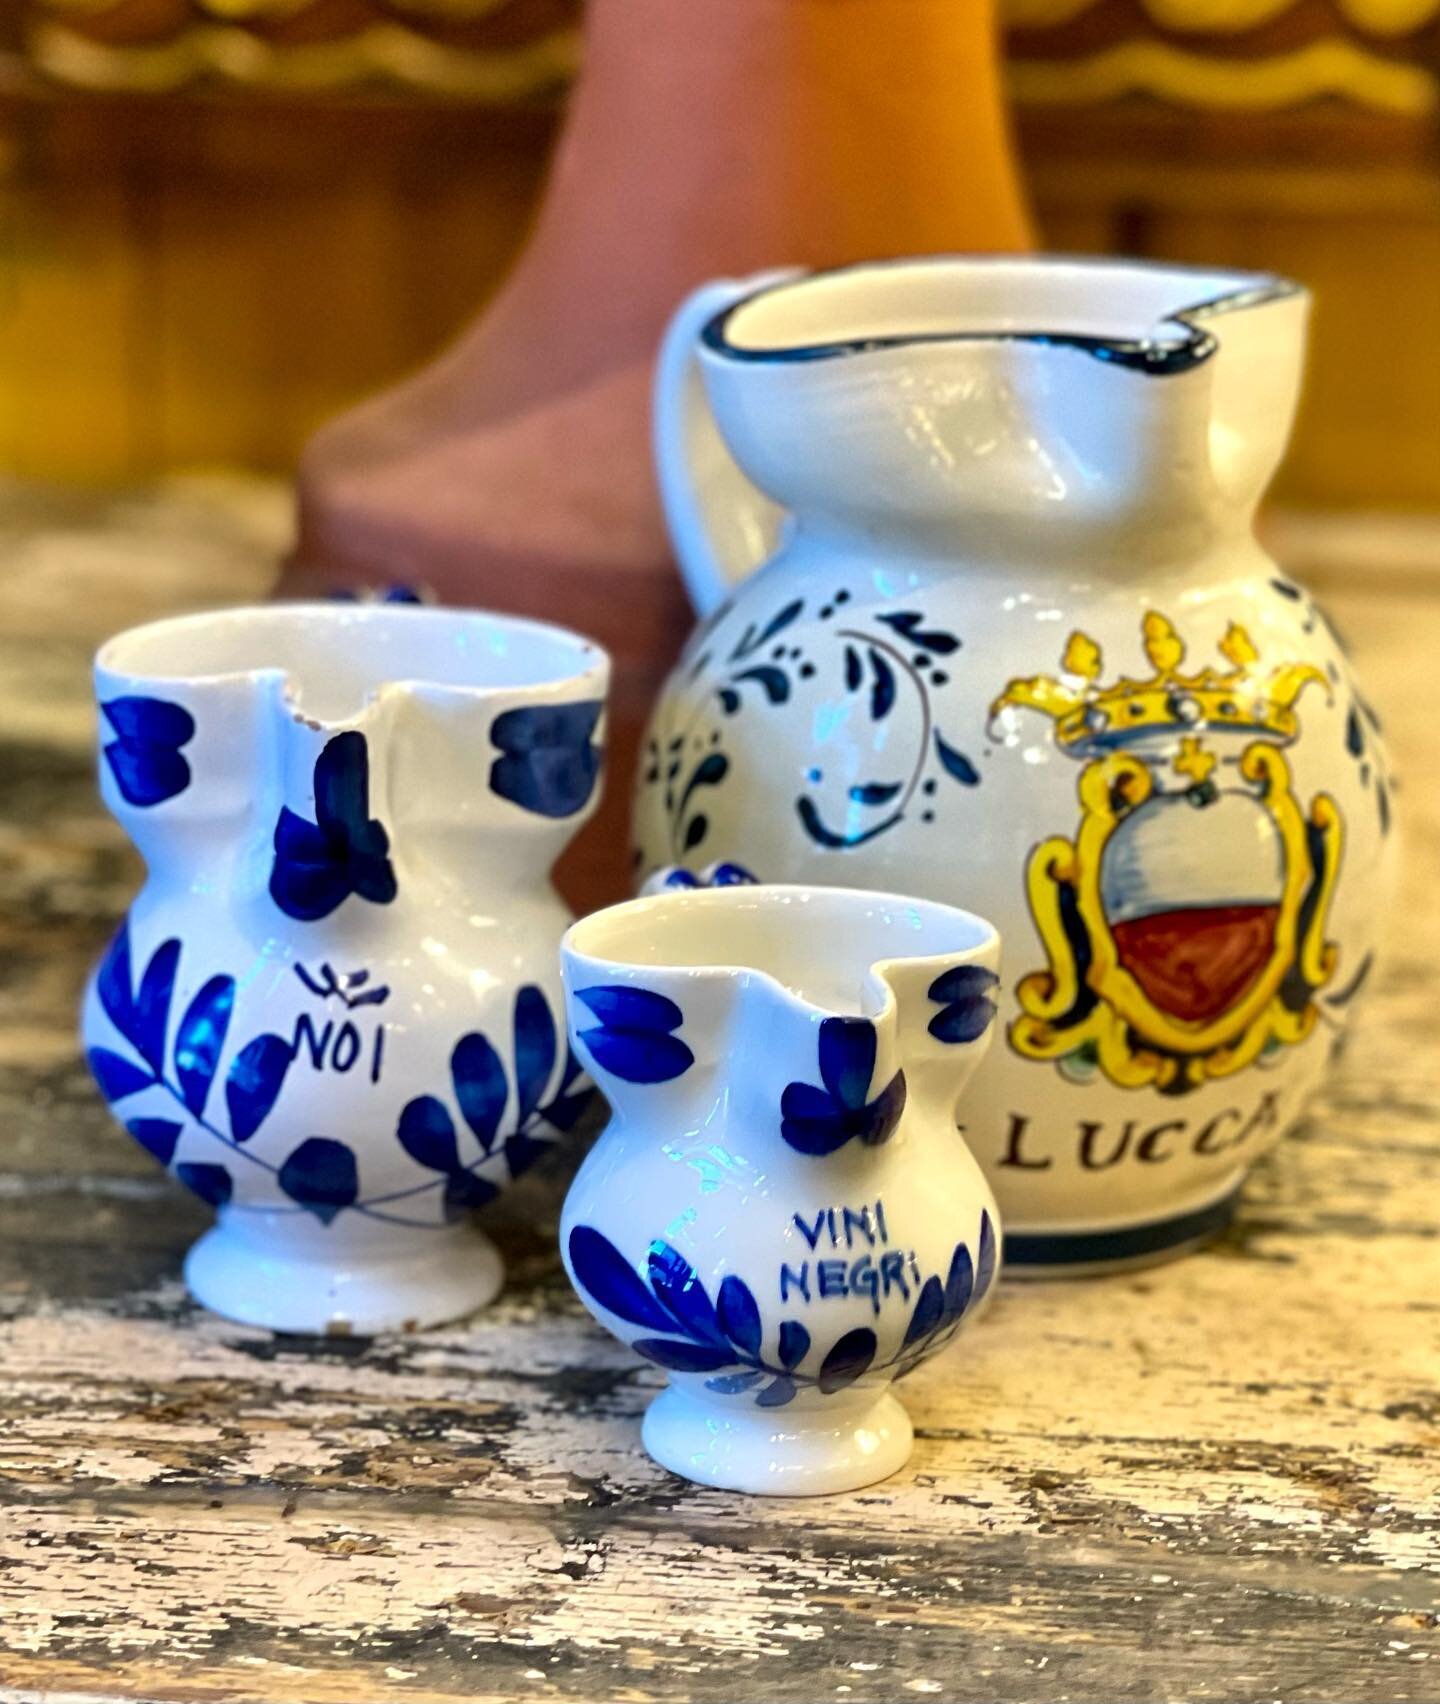 Direct from Italy🇮🇹 #themost fantastic #variety of vintage #water and #wine pitchers 💧🍷🍶
These little #beauties are sure to #addinterest and #startconversations around the #dinnertable 🍽️🍝💙

#waterpitcher #winepitcher #pitcher #italy #italian